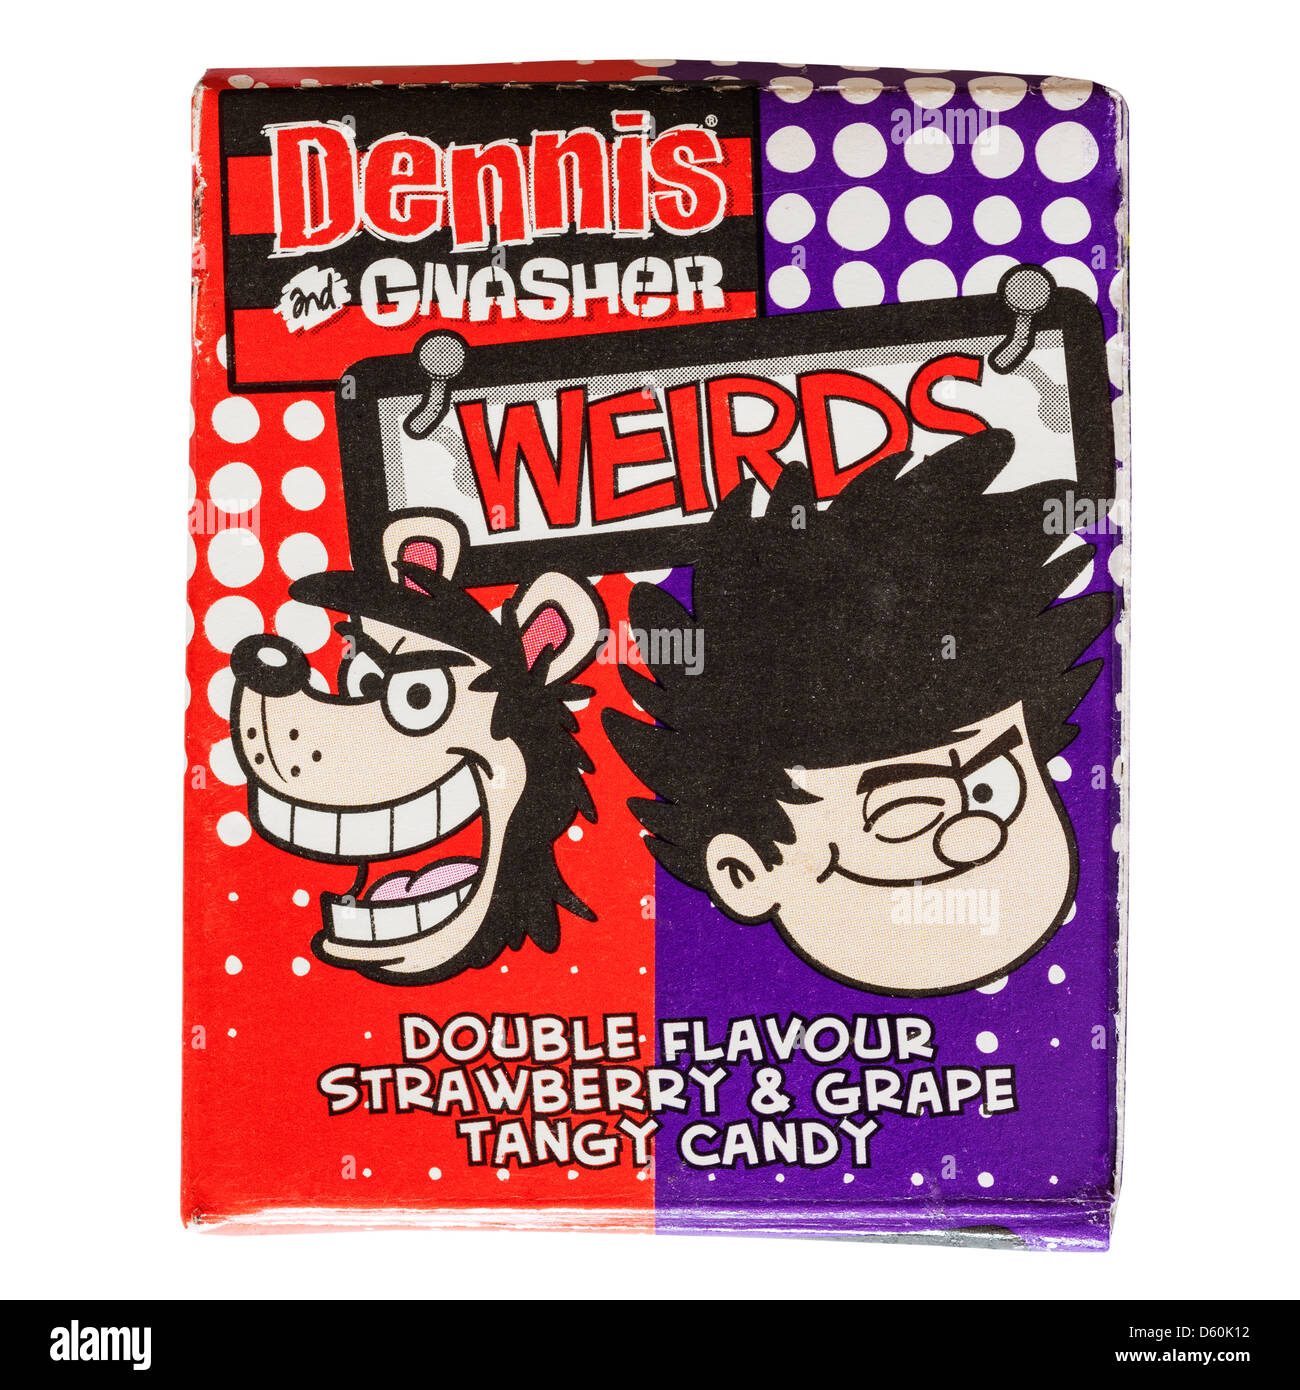 A packet of Dennis and gnasher weirds candy on a white background Stock Photo